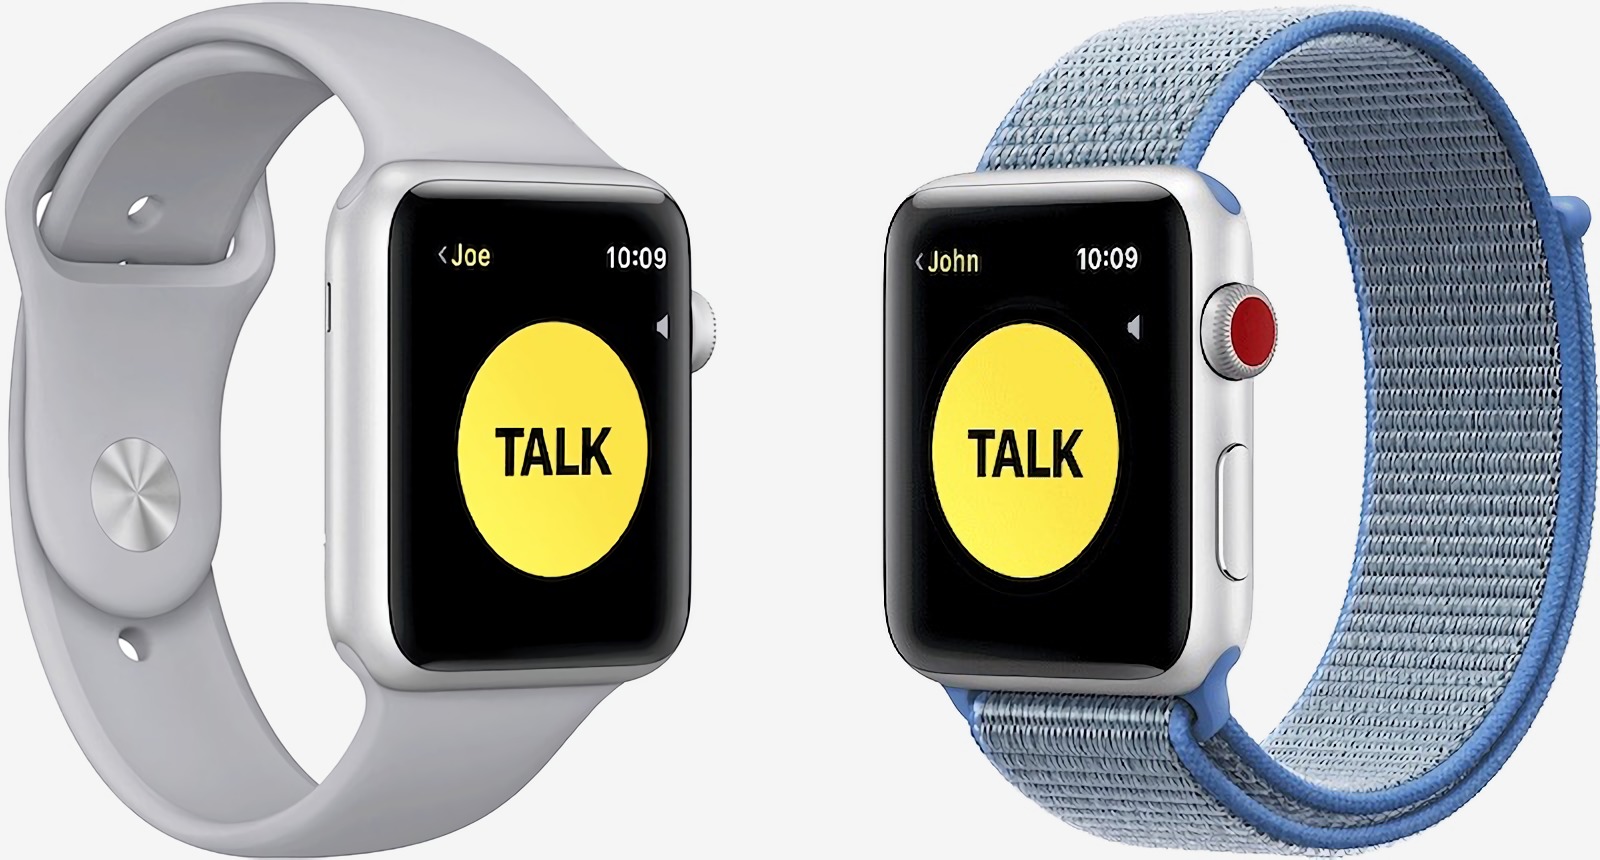 Apple disables Walkie-Talkie app as it works to patch eavesdropping vulnerability